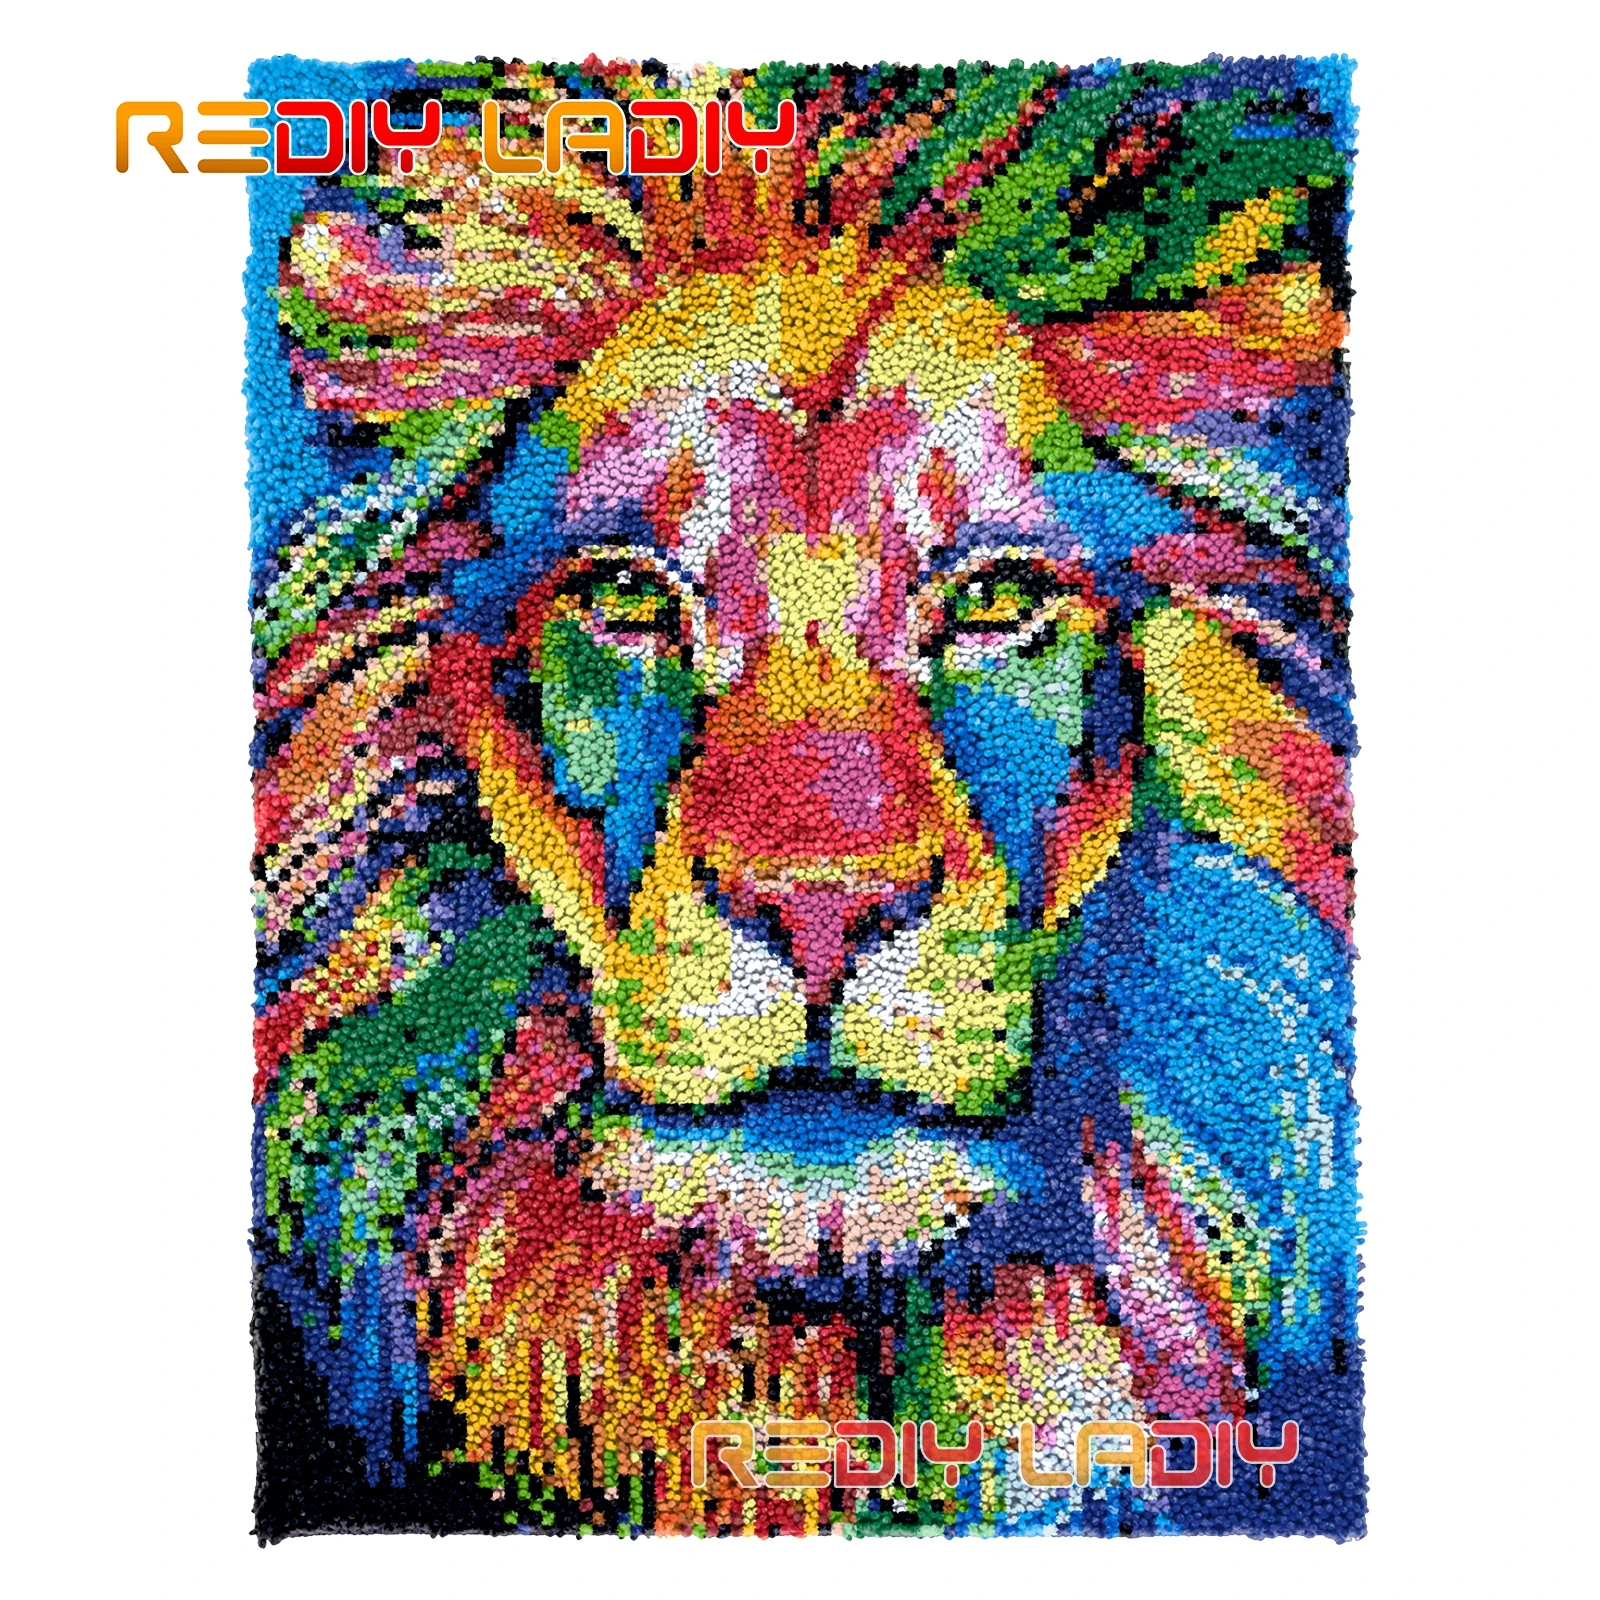 

DIY Carpet Rug Kits Rainbow Lion Seat Cushion Latch Hook Rug Thick Yarn Needlework Crocheting Tapestry Knotted Floor Mat Crafts